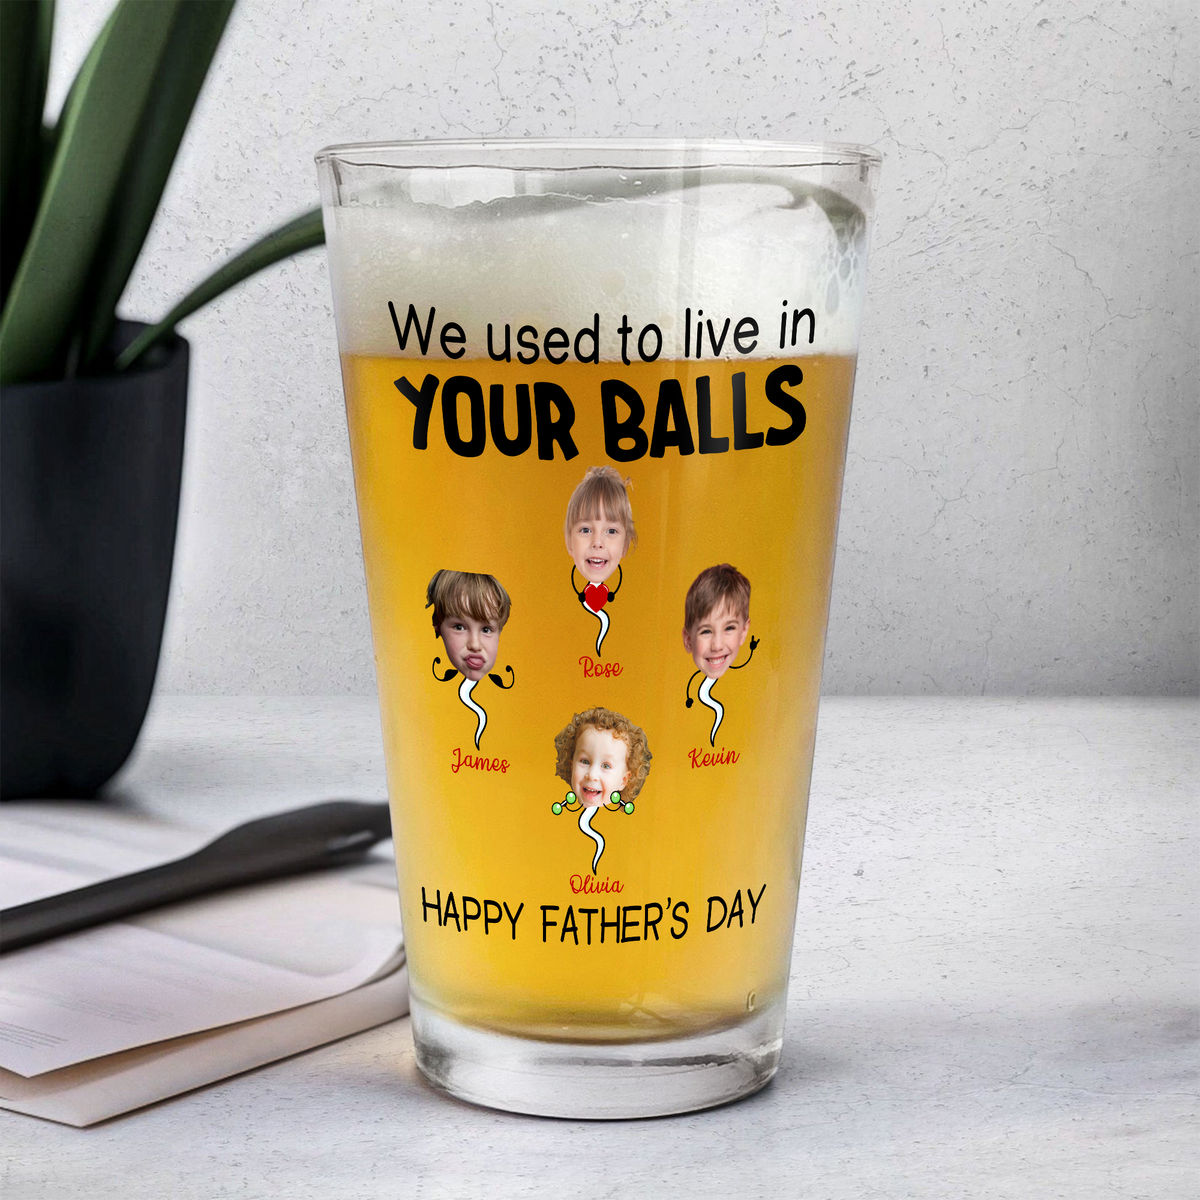 Photo Beer Glass - We used to lived in your balls. Happy Father's Day - Upto 5 Childrens - Father's Day Gift, Gift For Dad, Grandpa - Personalized Photo Beer Glass_2